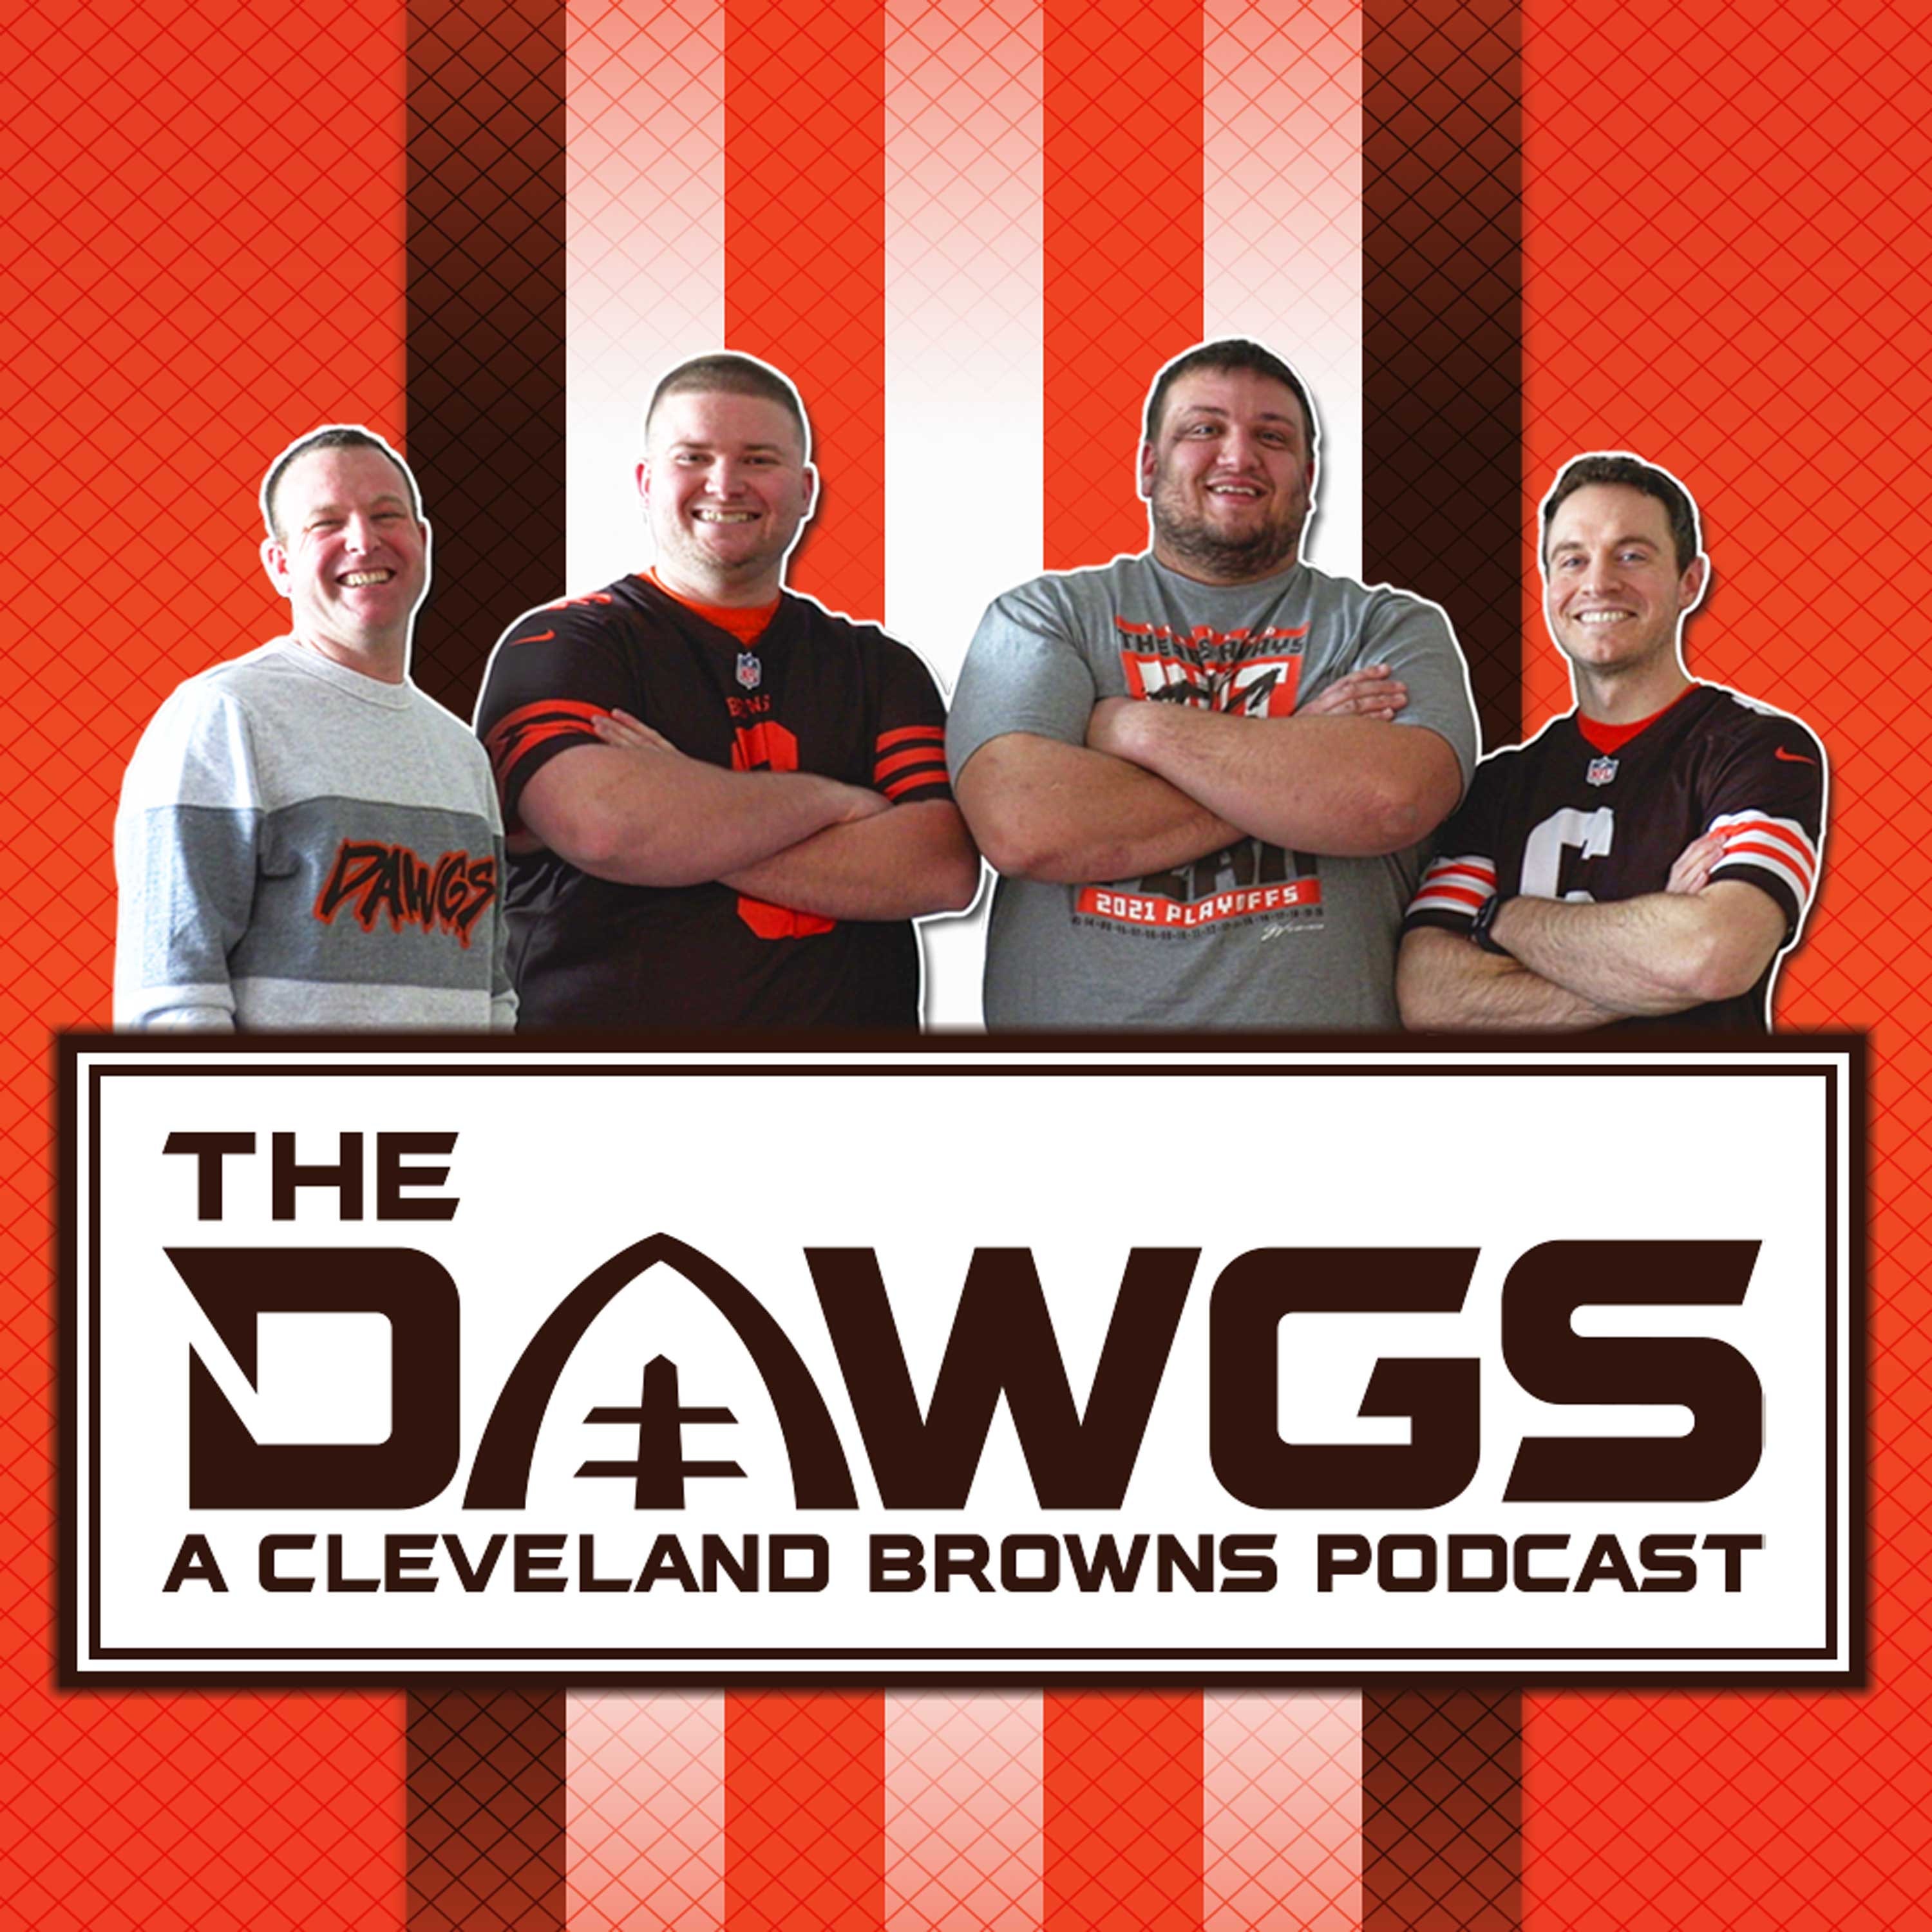 Chiefs Recap + Season Reflection | The Dawgs - A Cleveland Browns Podcast - January 20, 2021